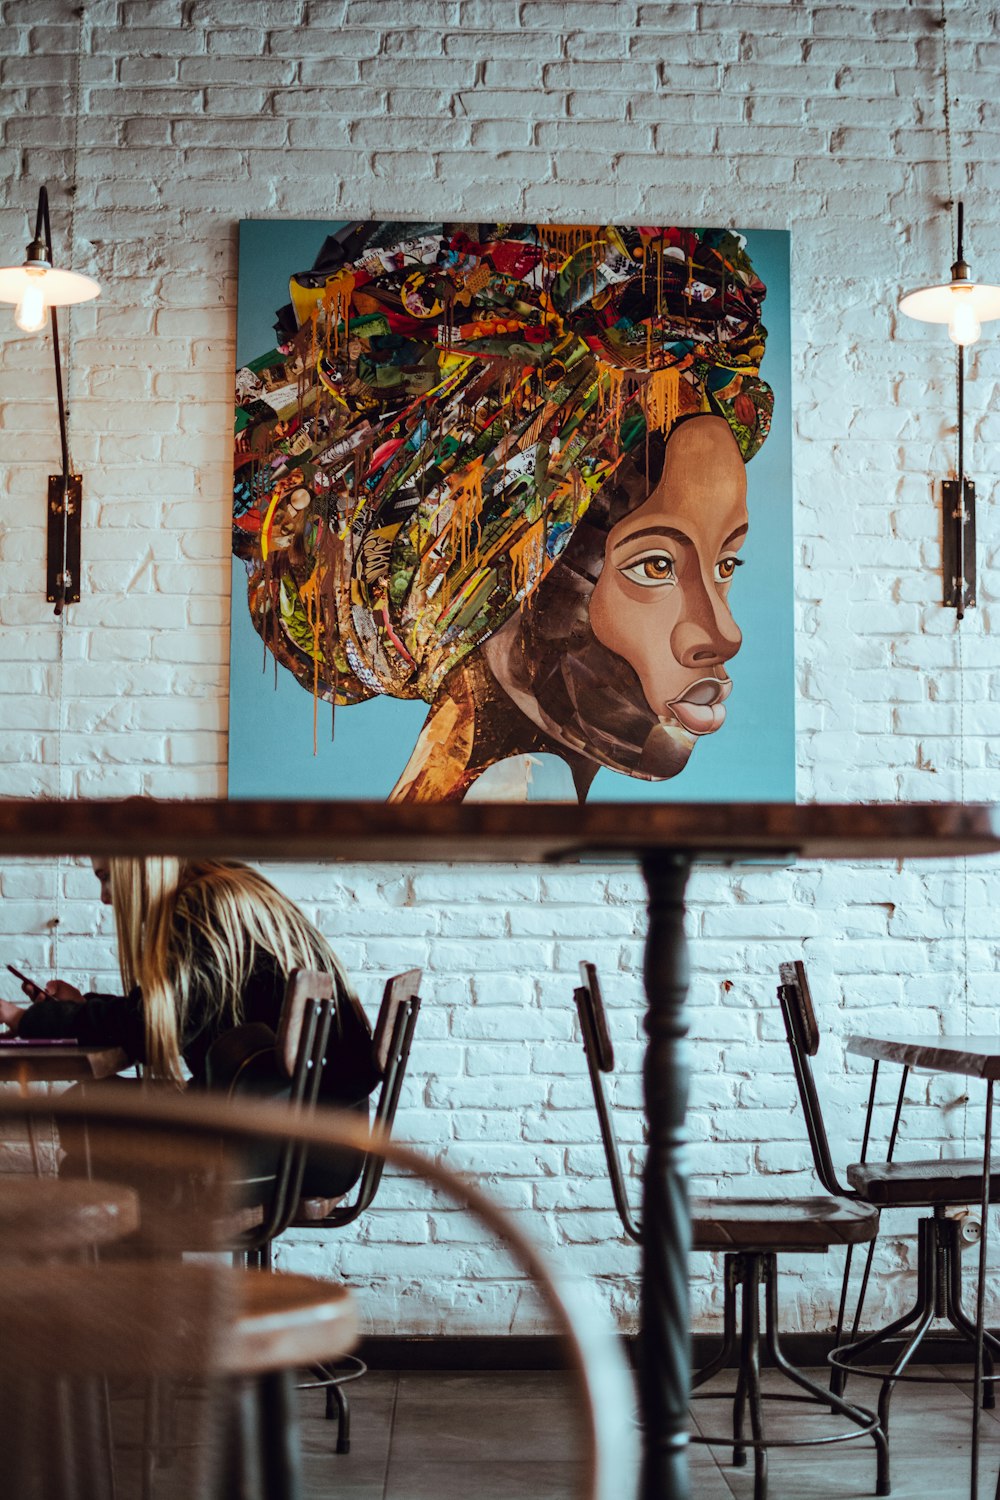 multicolored painting of woman's portrait hanging on wall